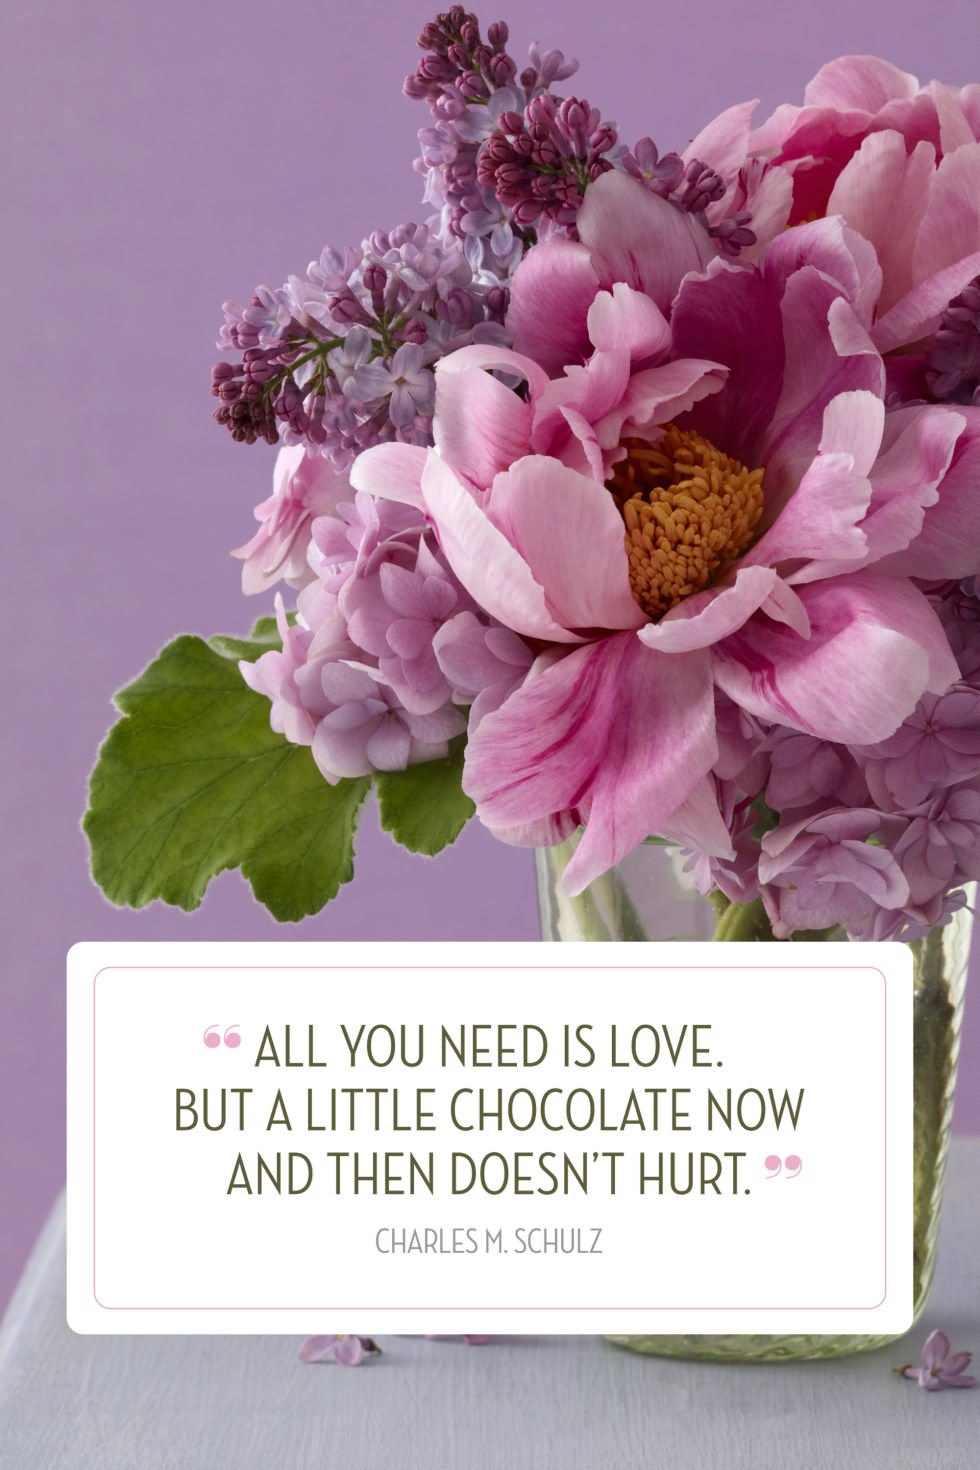 All you need is love. but a little chocolate now and then doesn’t heart.